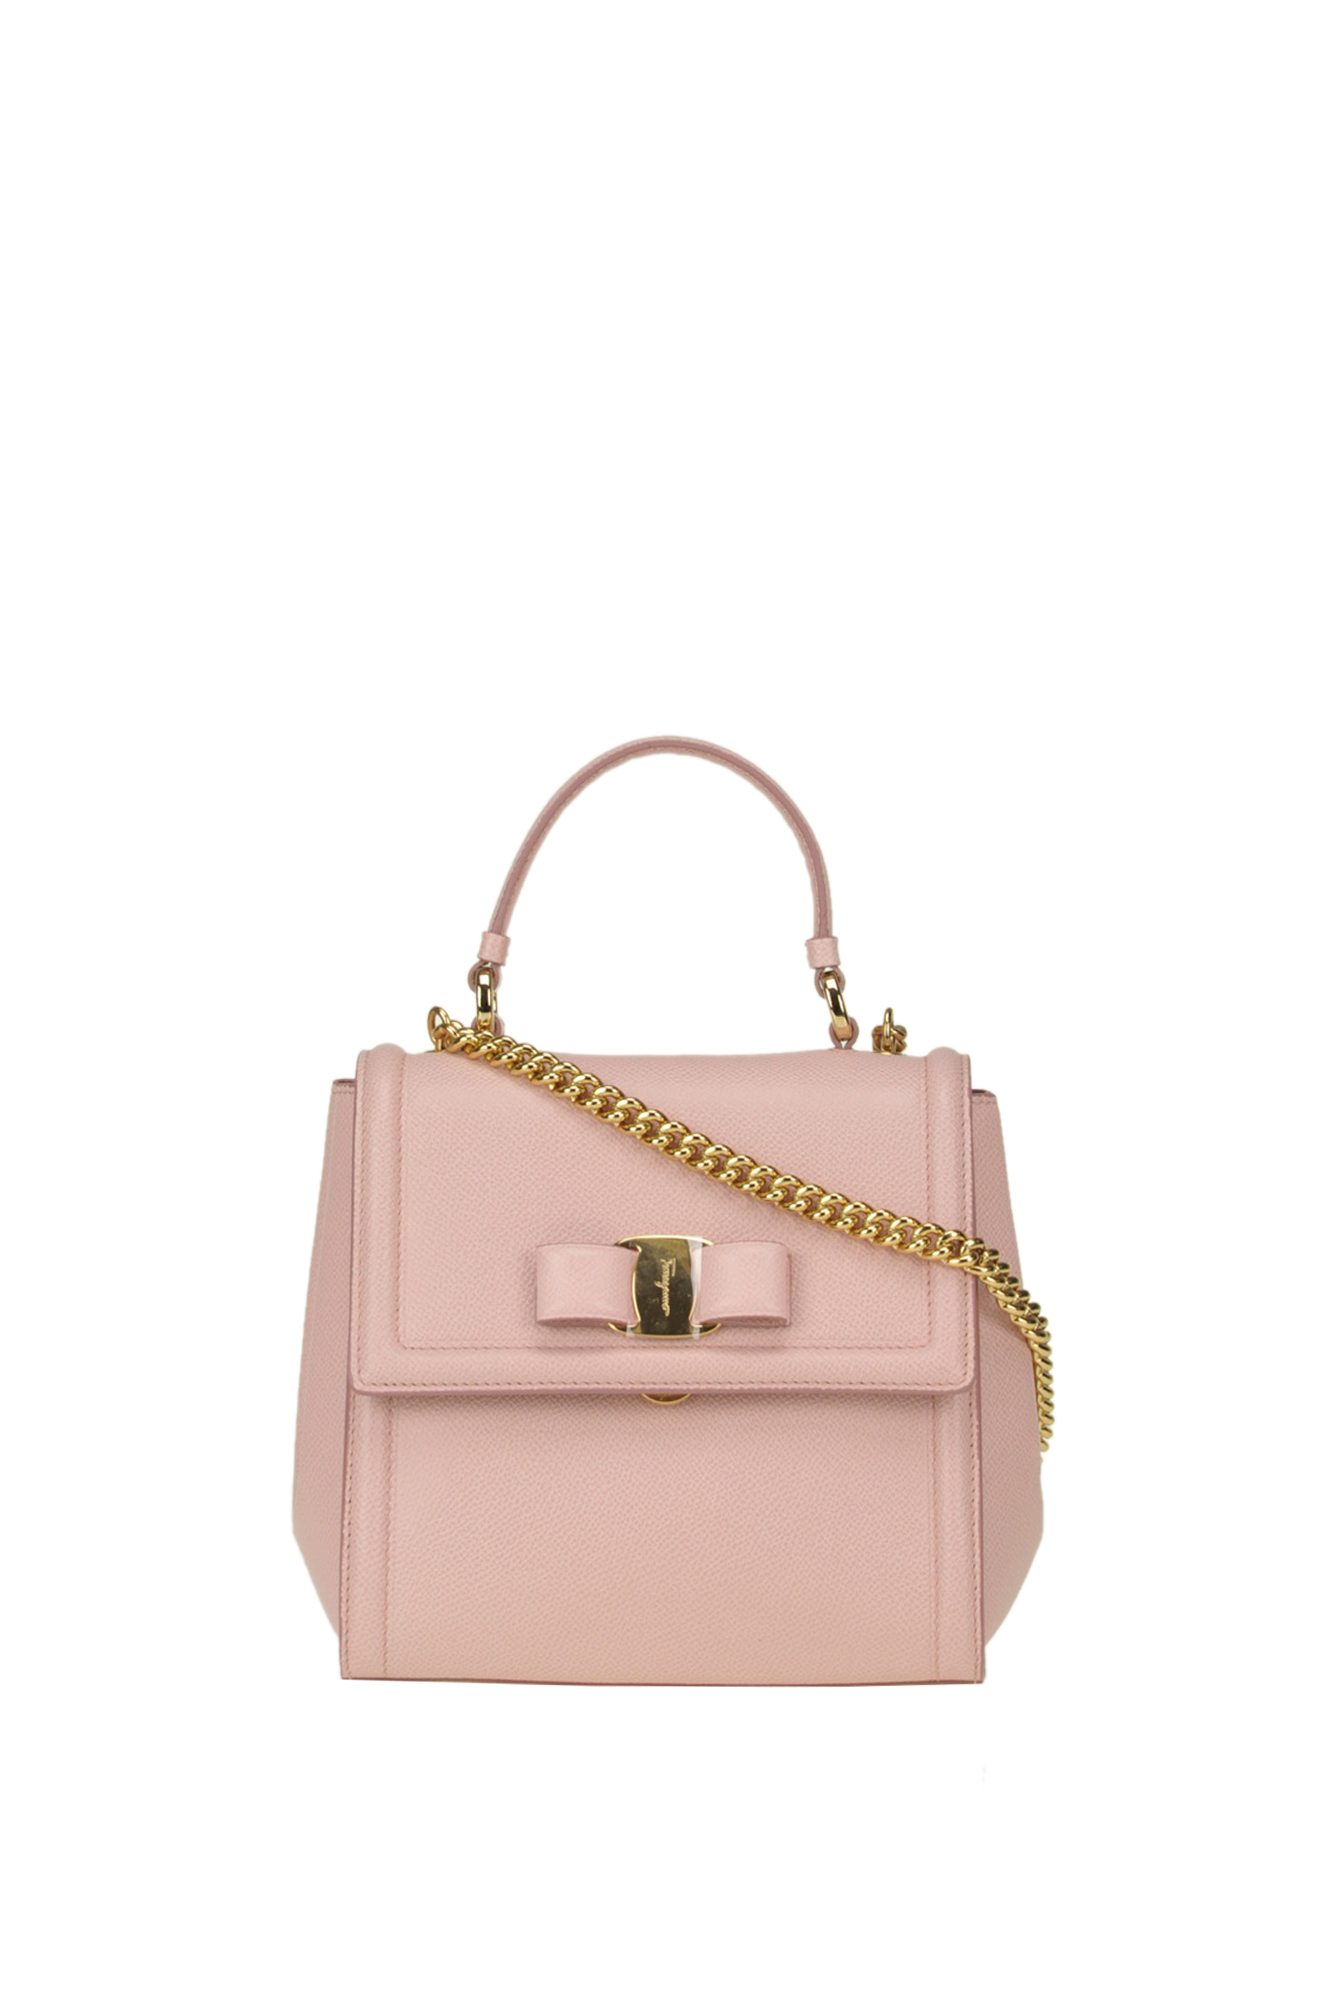 Ferragamo Carrie Pebble Grainy Leather Bag In Pink